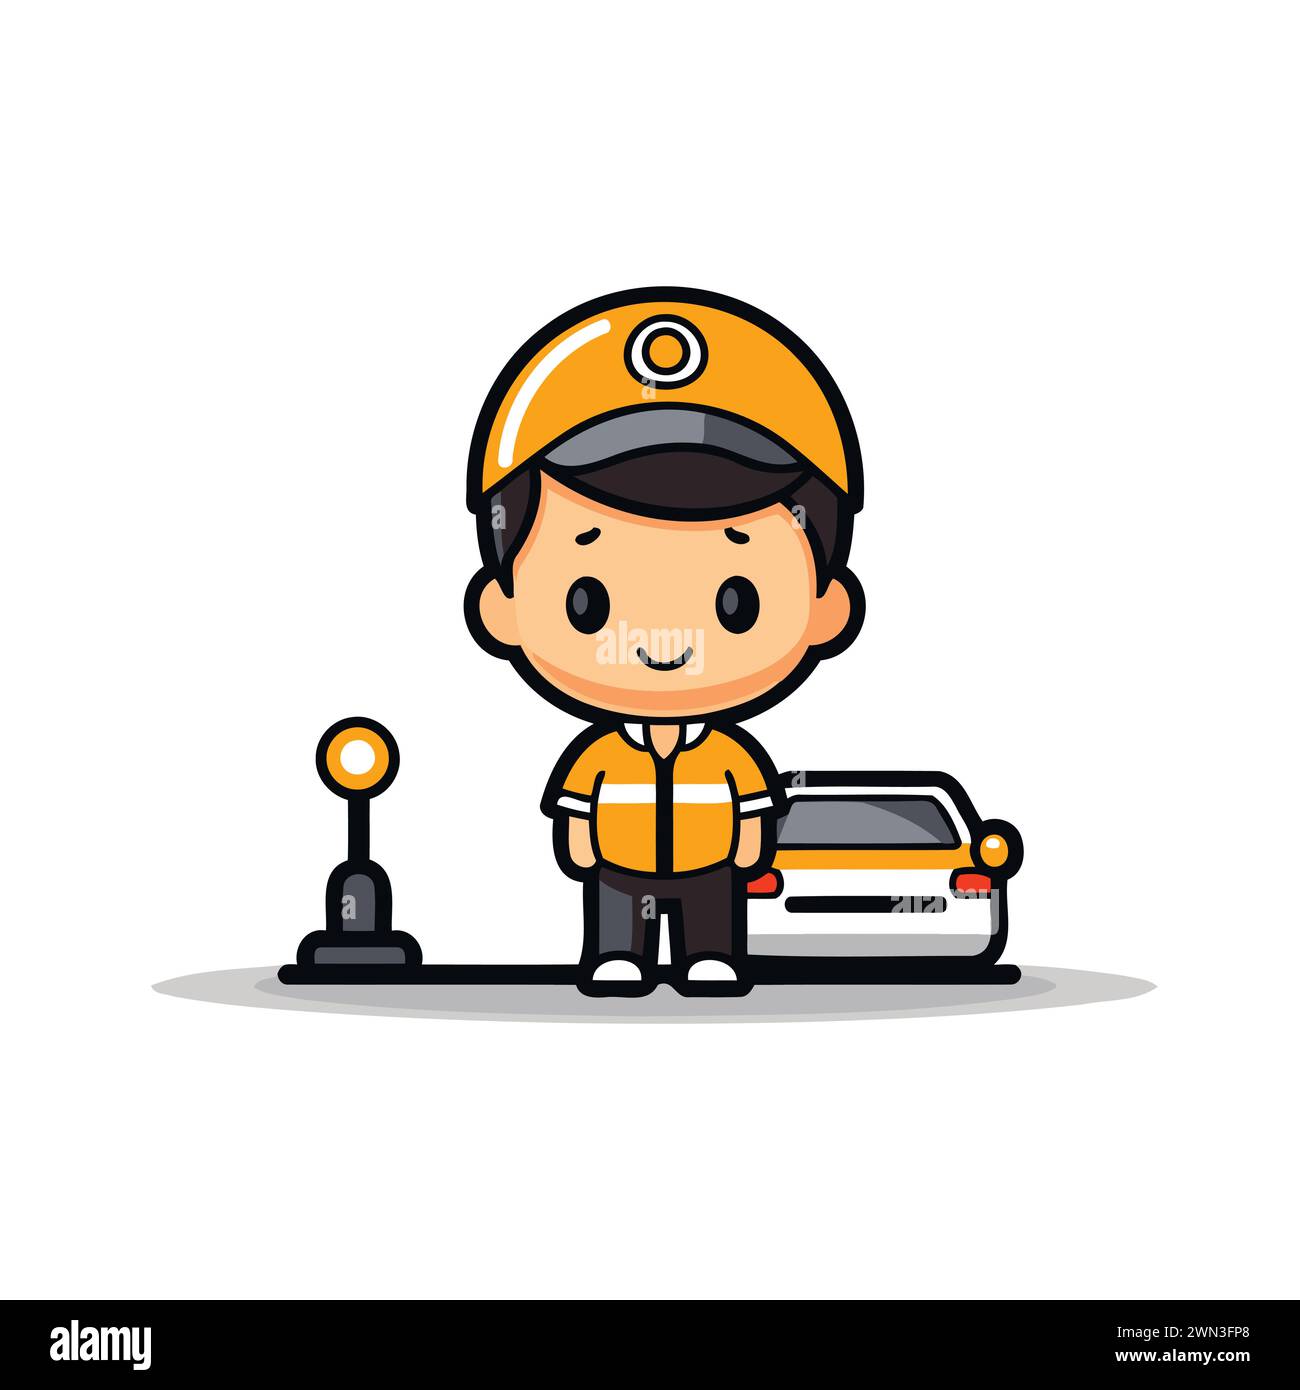 Car service - Auto mechanic cartoon character vector illustration on white background. Stock Vector